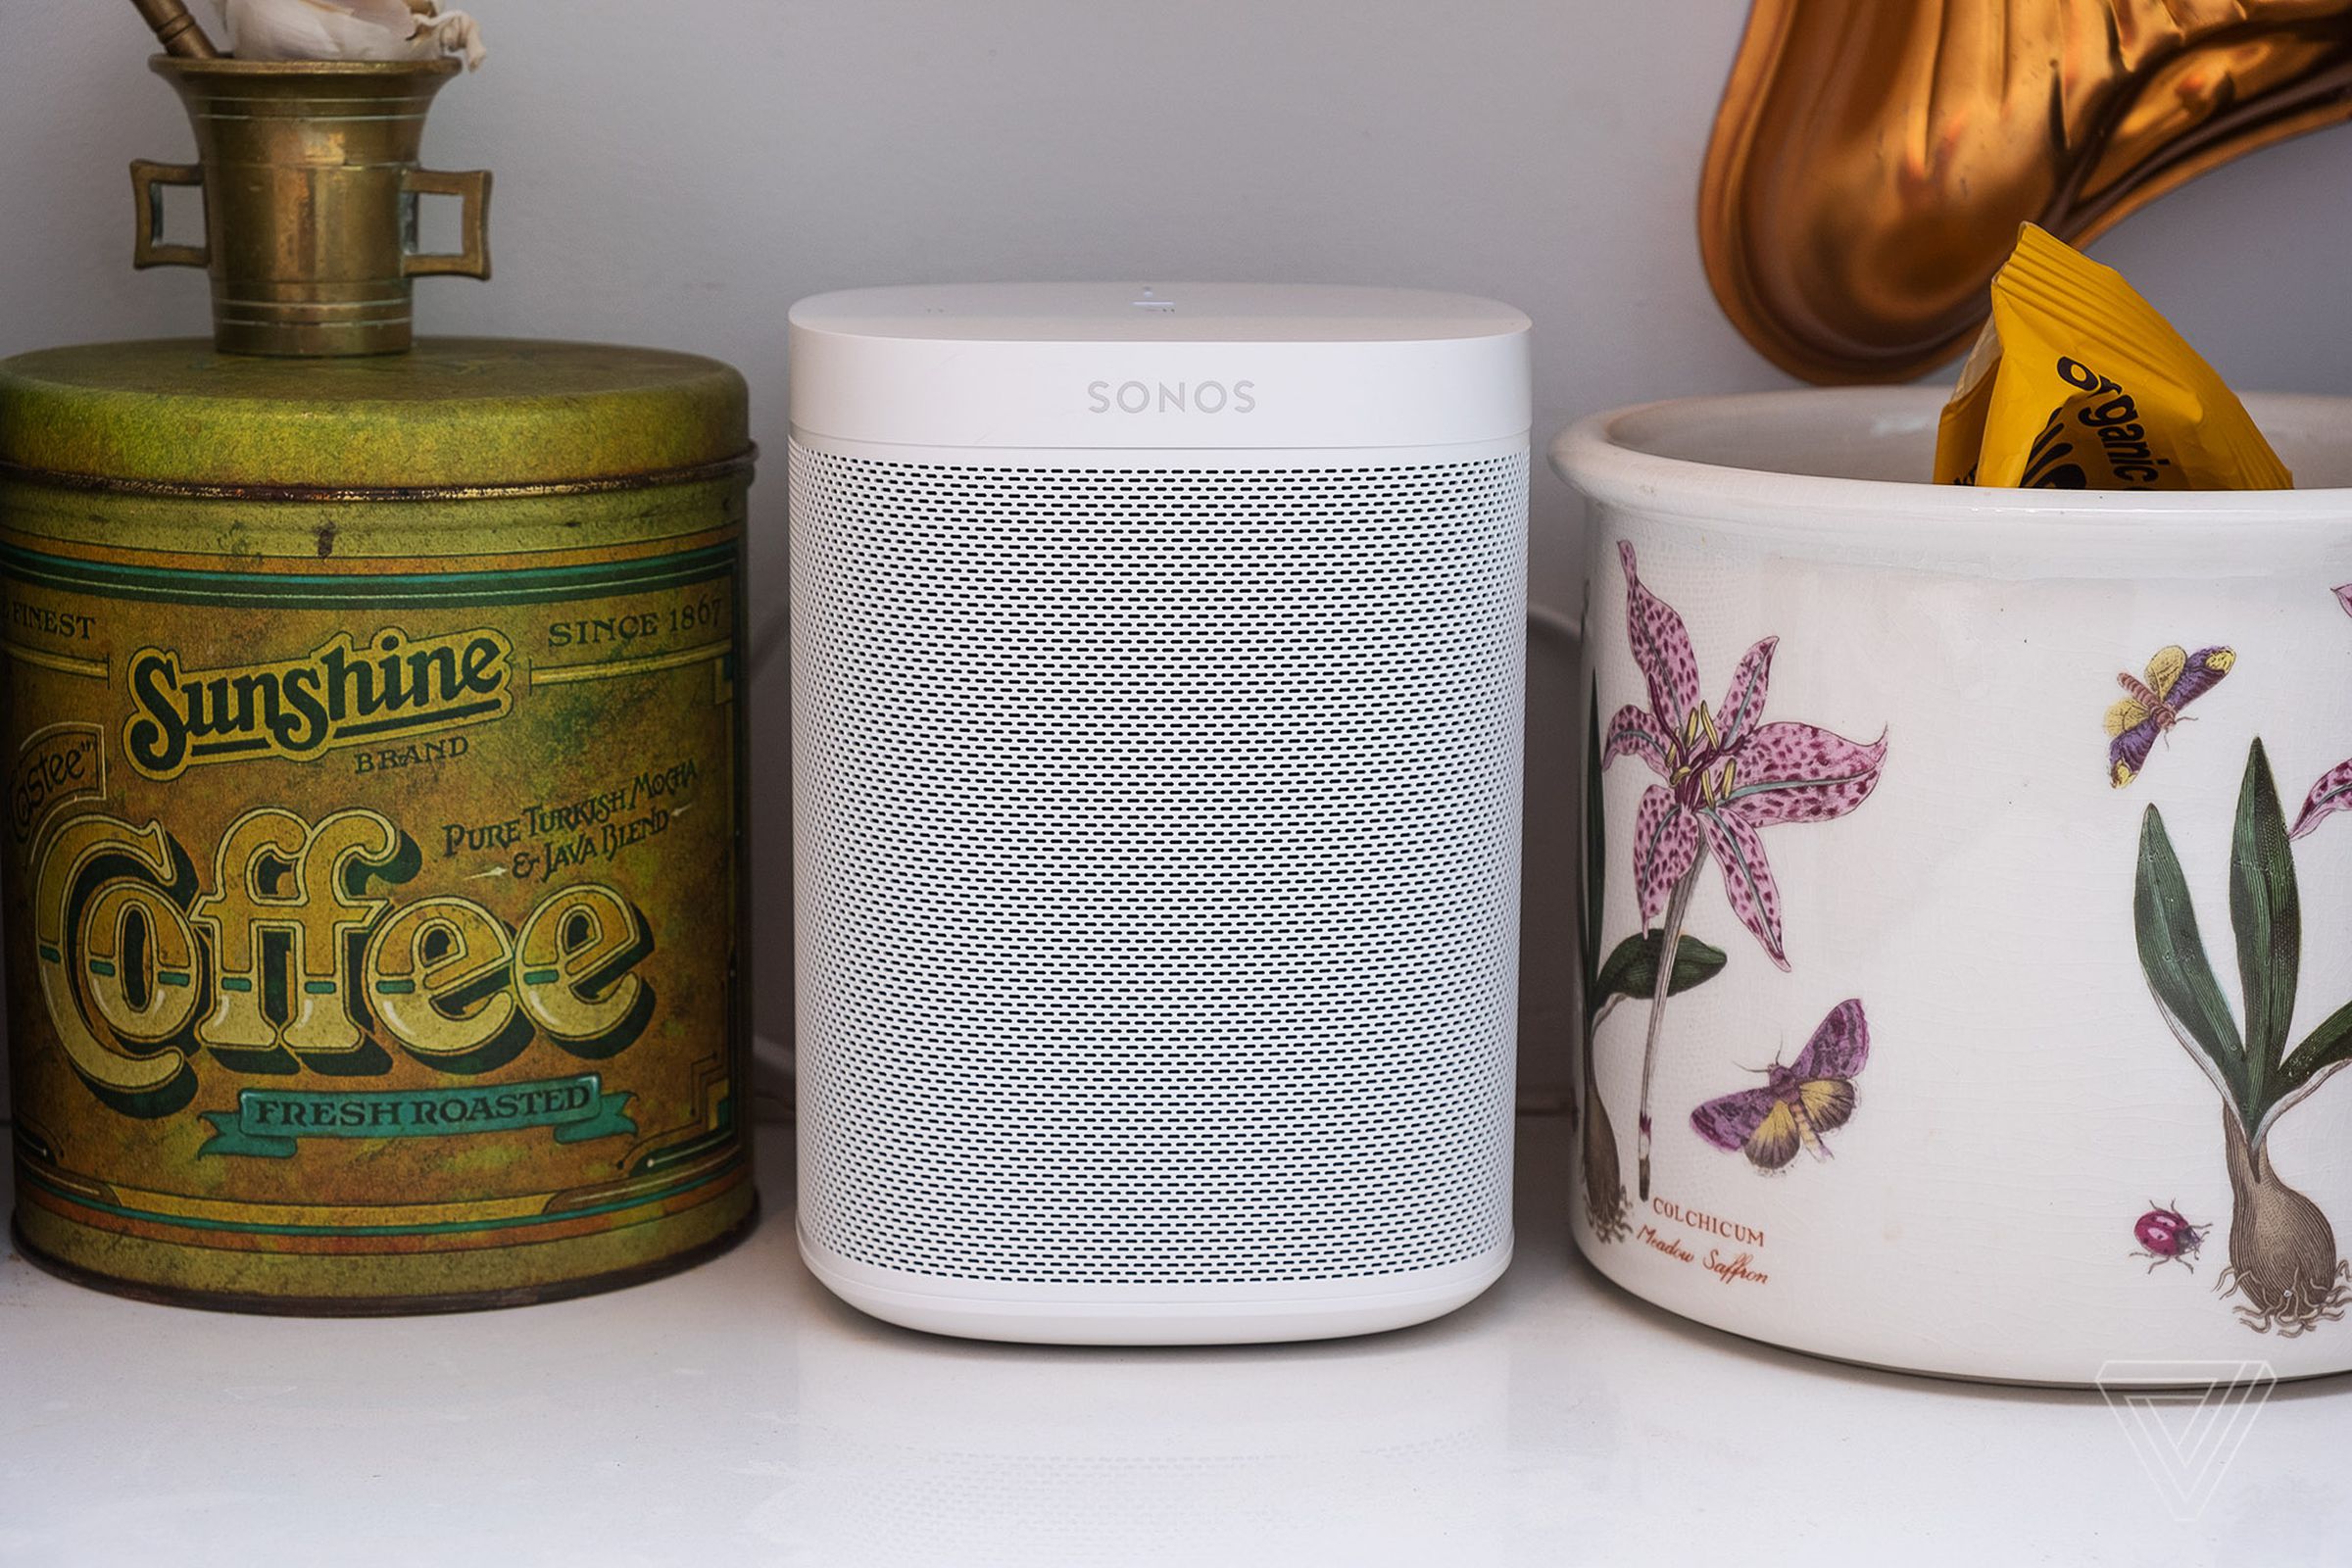 The Sonos Beam sitting on a kitchen counter between a jar and a vase.